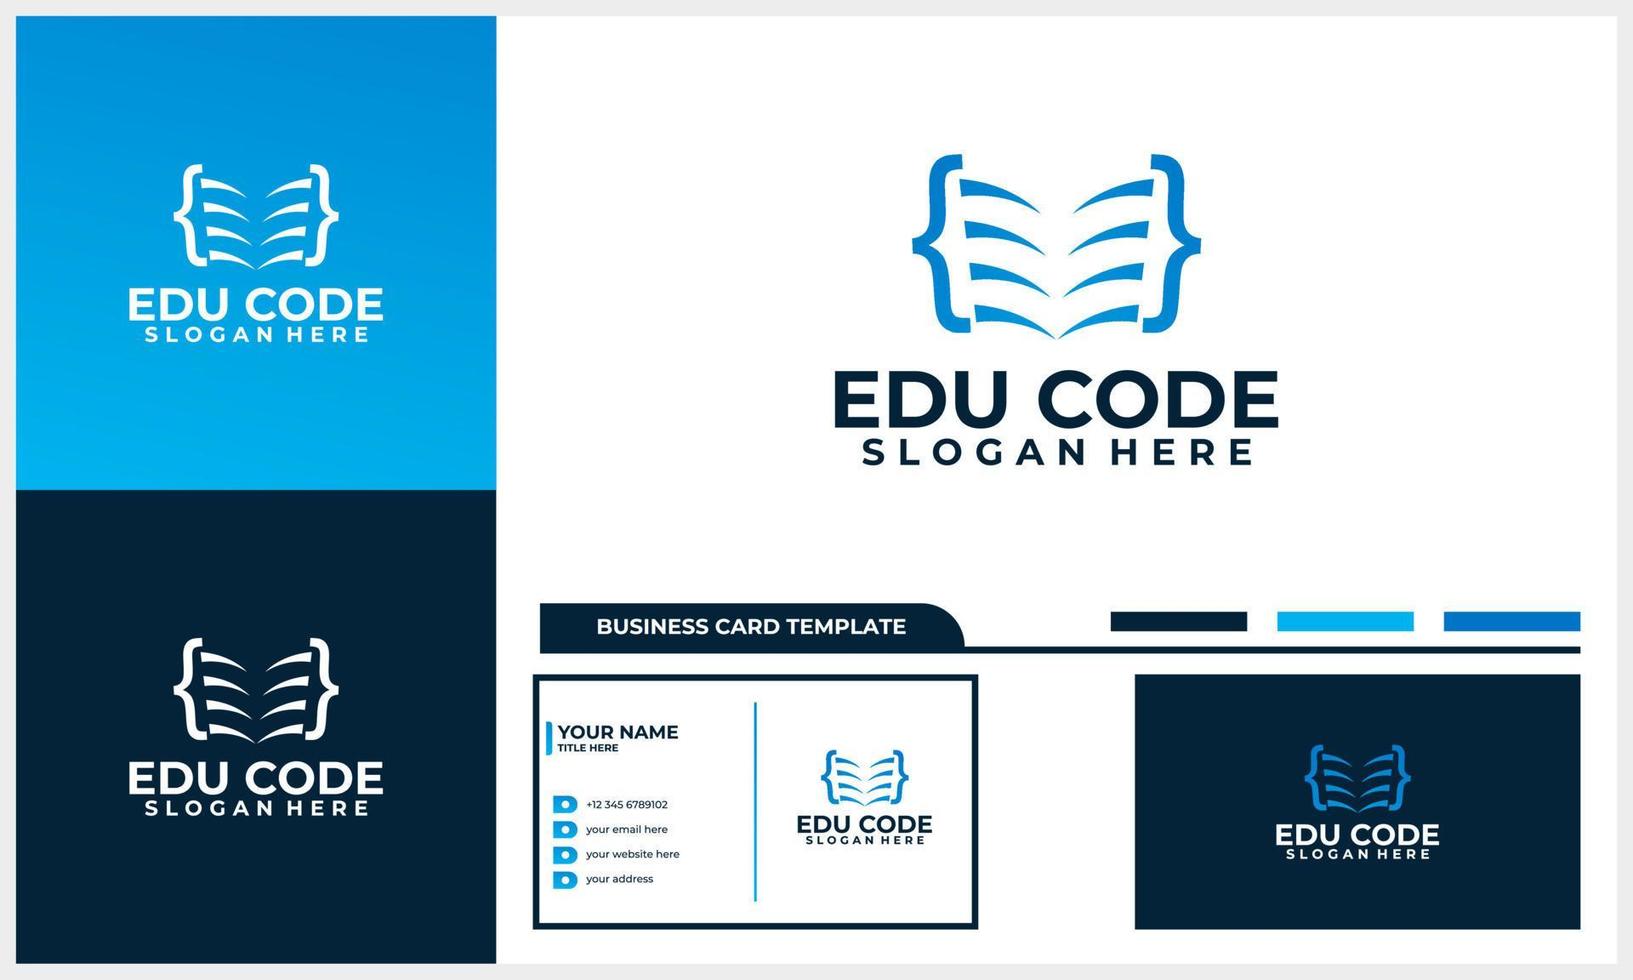 education book with coding code logo concept with business card template vector